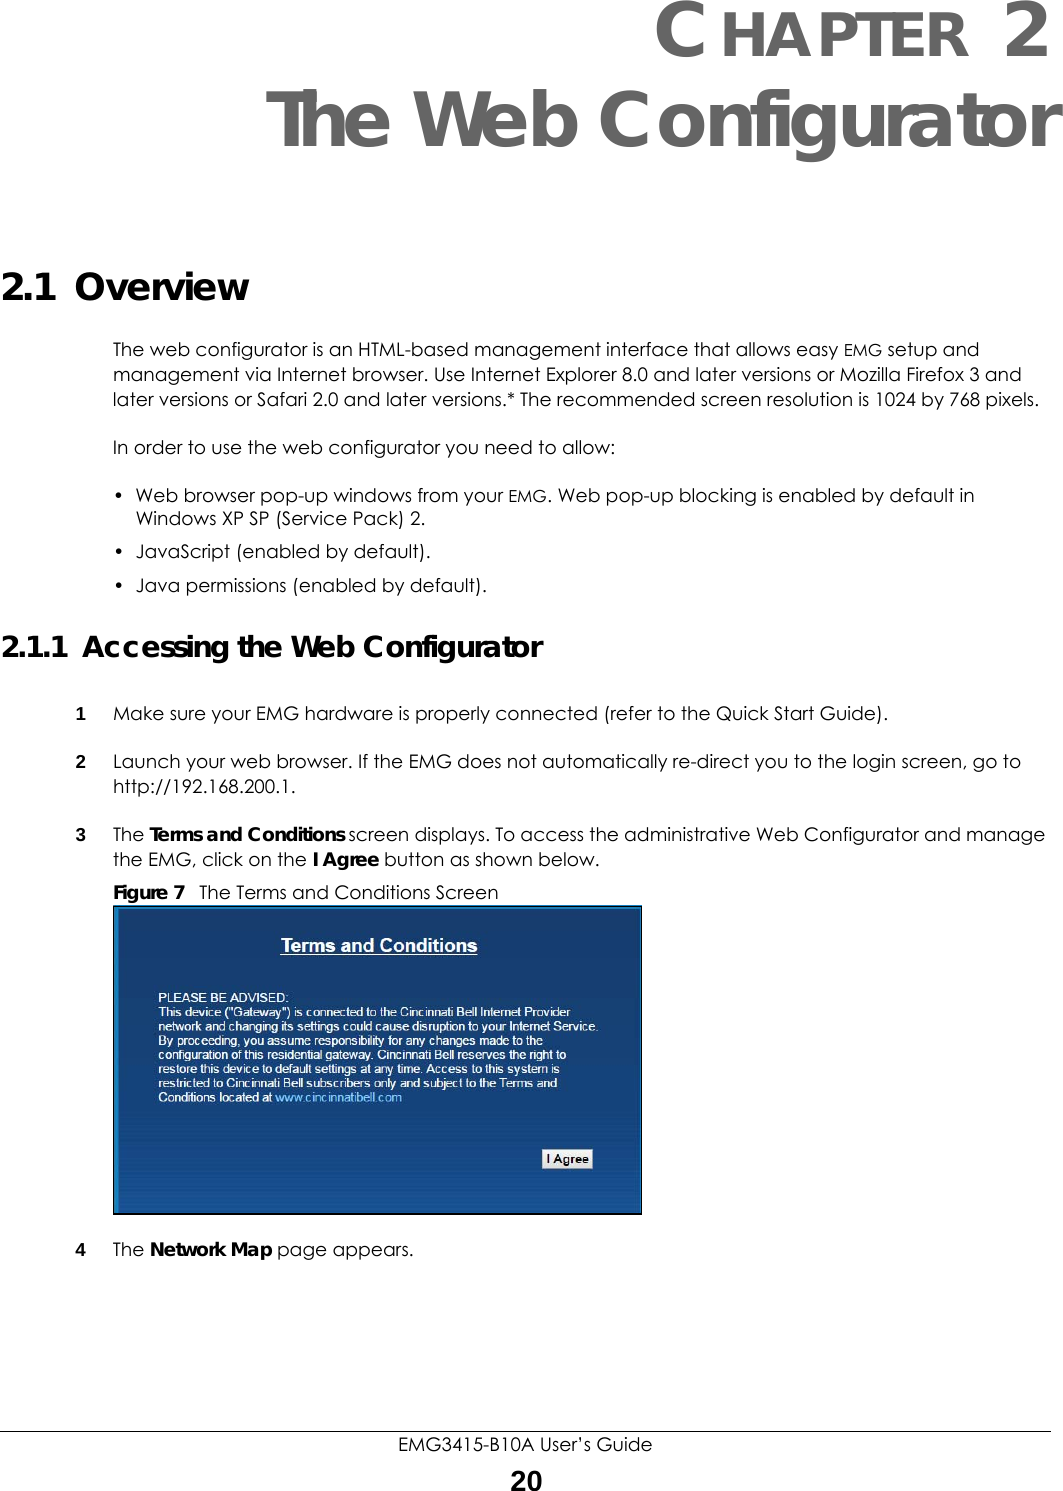 EMG3415-B10A User’s Guide20CHAPTER 2The Web Configurator2.1  OverviewThe web configurator is an HTML-based management interface that allows easy EMG setup and management via Internet browser. Use Internet Explorer 8.0 and later versions or Mozilla Firefox 3 and later versions or Safari 2.0 and later versions.* The recommended screen resolution is 1024 by 768 pixels.In order to use the web configurator you need to allow:• Web browser pop-up windows from your EMG. Web pop-up blocking is enabled by default in Windows XP SP (Service Pack) 2.• JavaScript (enabled by default).• Java permissions (enabled by default).2.1.1  Accessing the Web Configurator1Make sure your EMG hardware is properly connected (refer to the Quick Start Guide).2Launch your web browser. If the EMG does not automatically re-direct you to the login screen, go to http://192.168.200.1.3The Terms and Conditions screen displays. To access the administrative Web Configurator and manage the EMG, click on the I Agree button as shown below. Figure 7   The Terms and Conditions Screen4The Network Map page appears. 